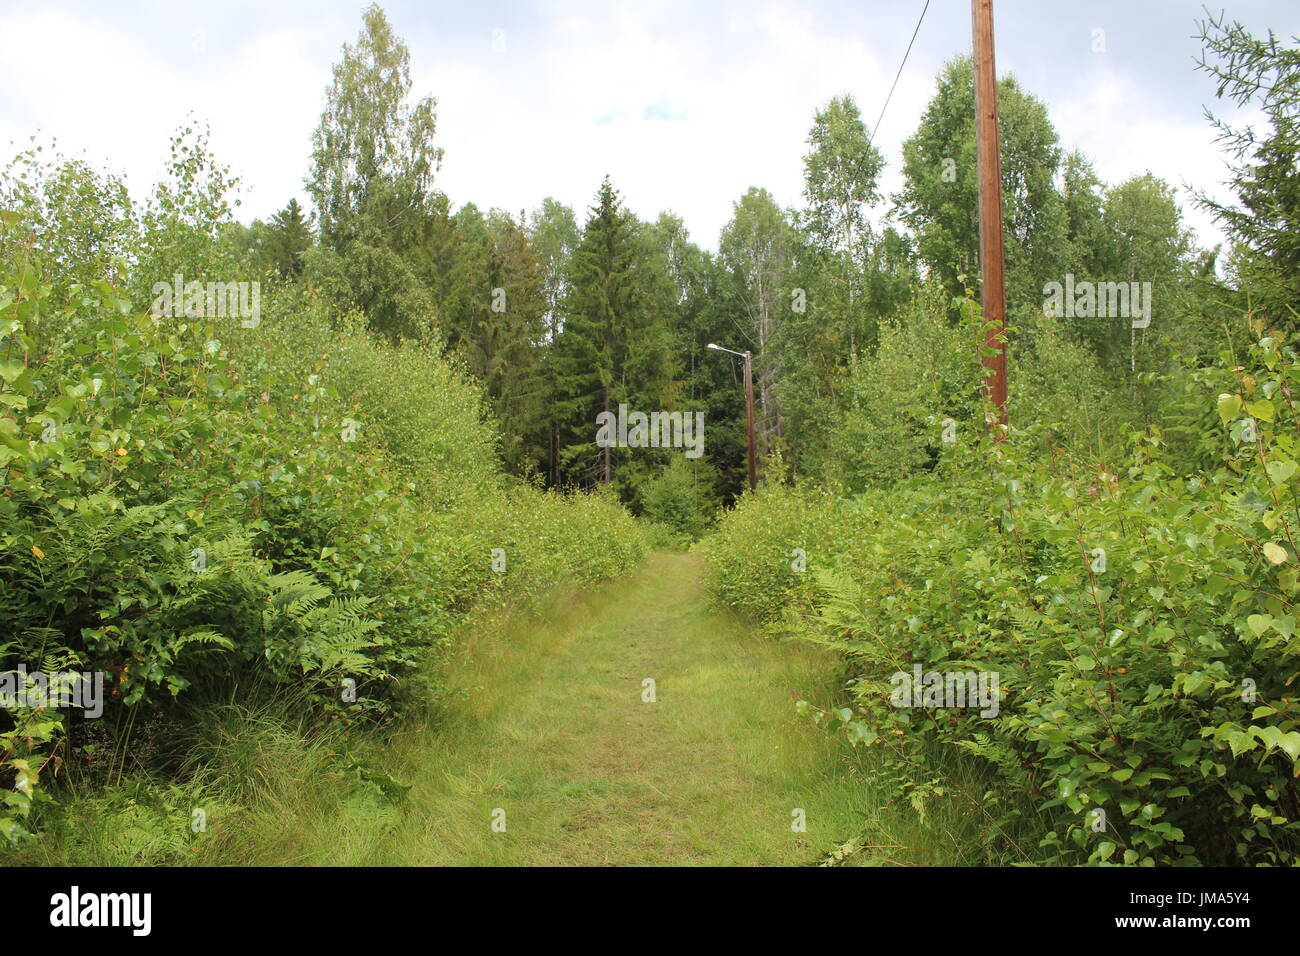 Overgrown cross-country ski track in the Scandinavian forest Stock Photo